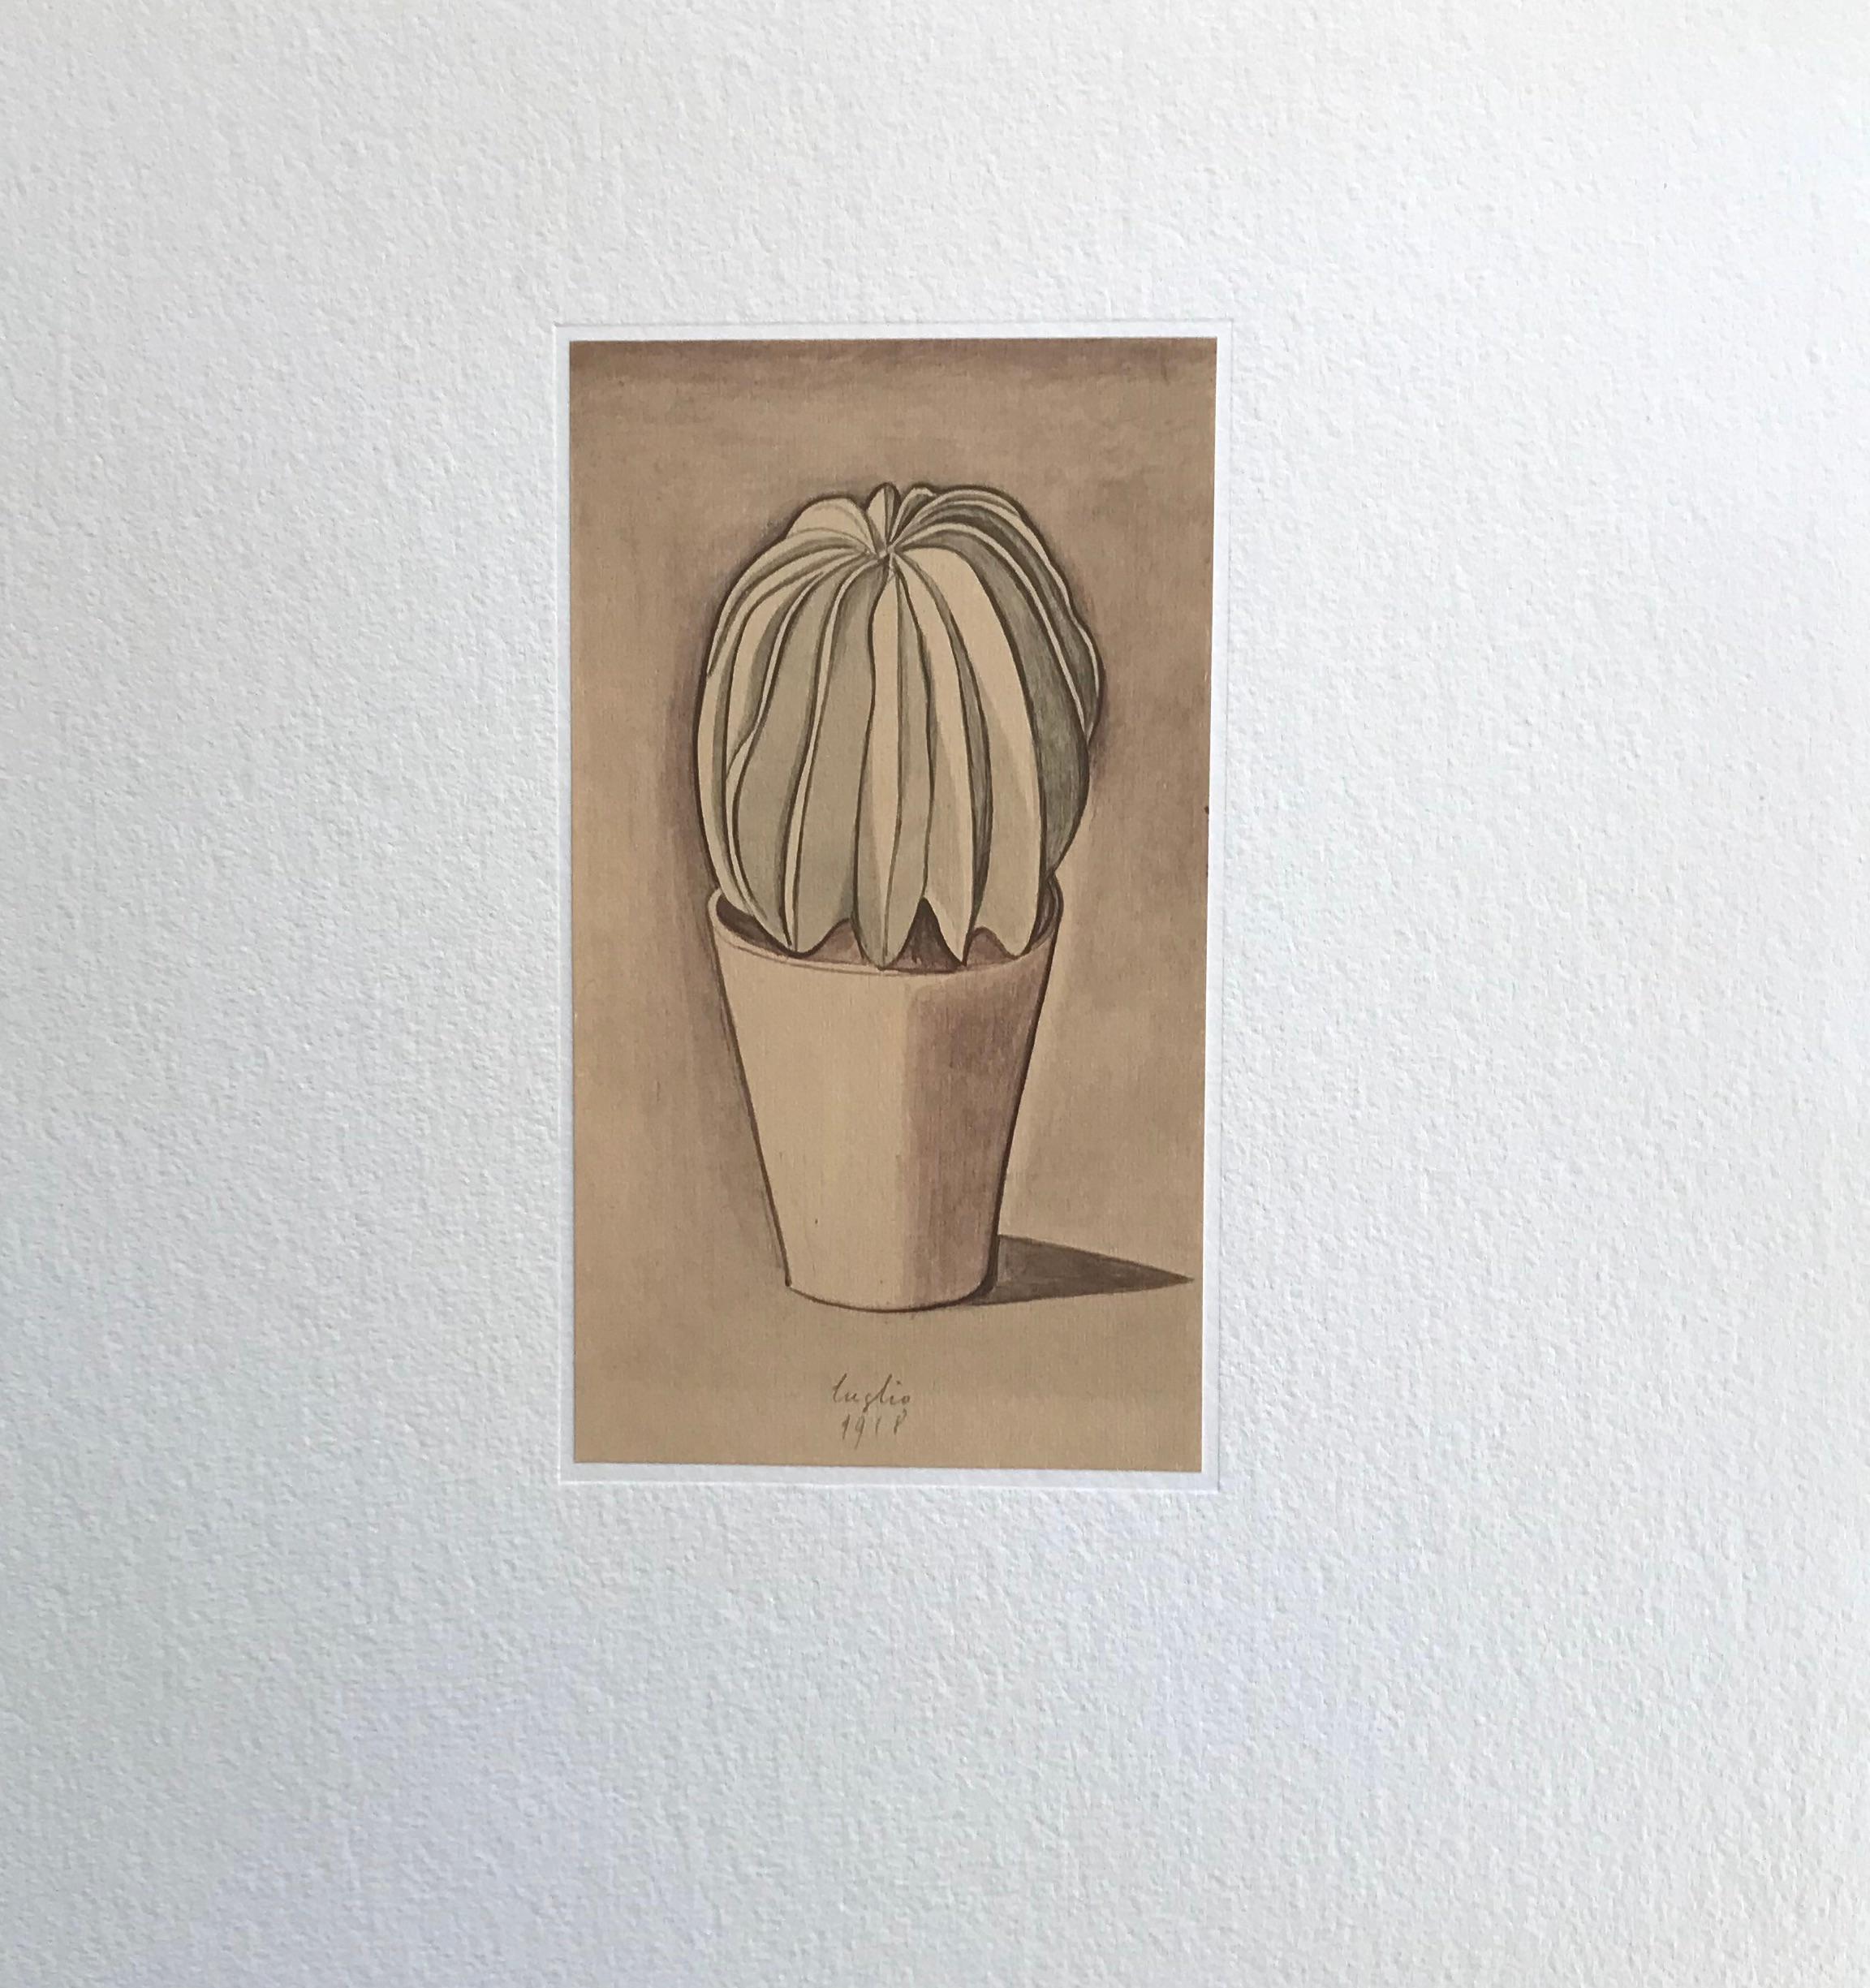 Vase with Plant is a superb original offset print, reproducing the original watercolor by Giorgio Morandi.

Signature by the artist is perfectly reproduced on plate.

From the volume 